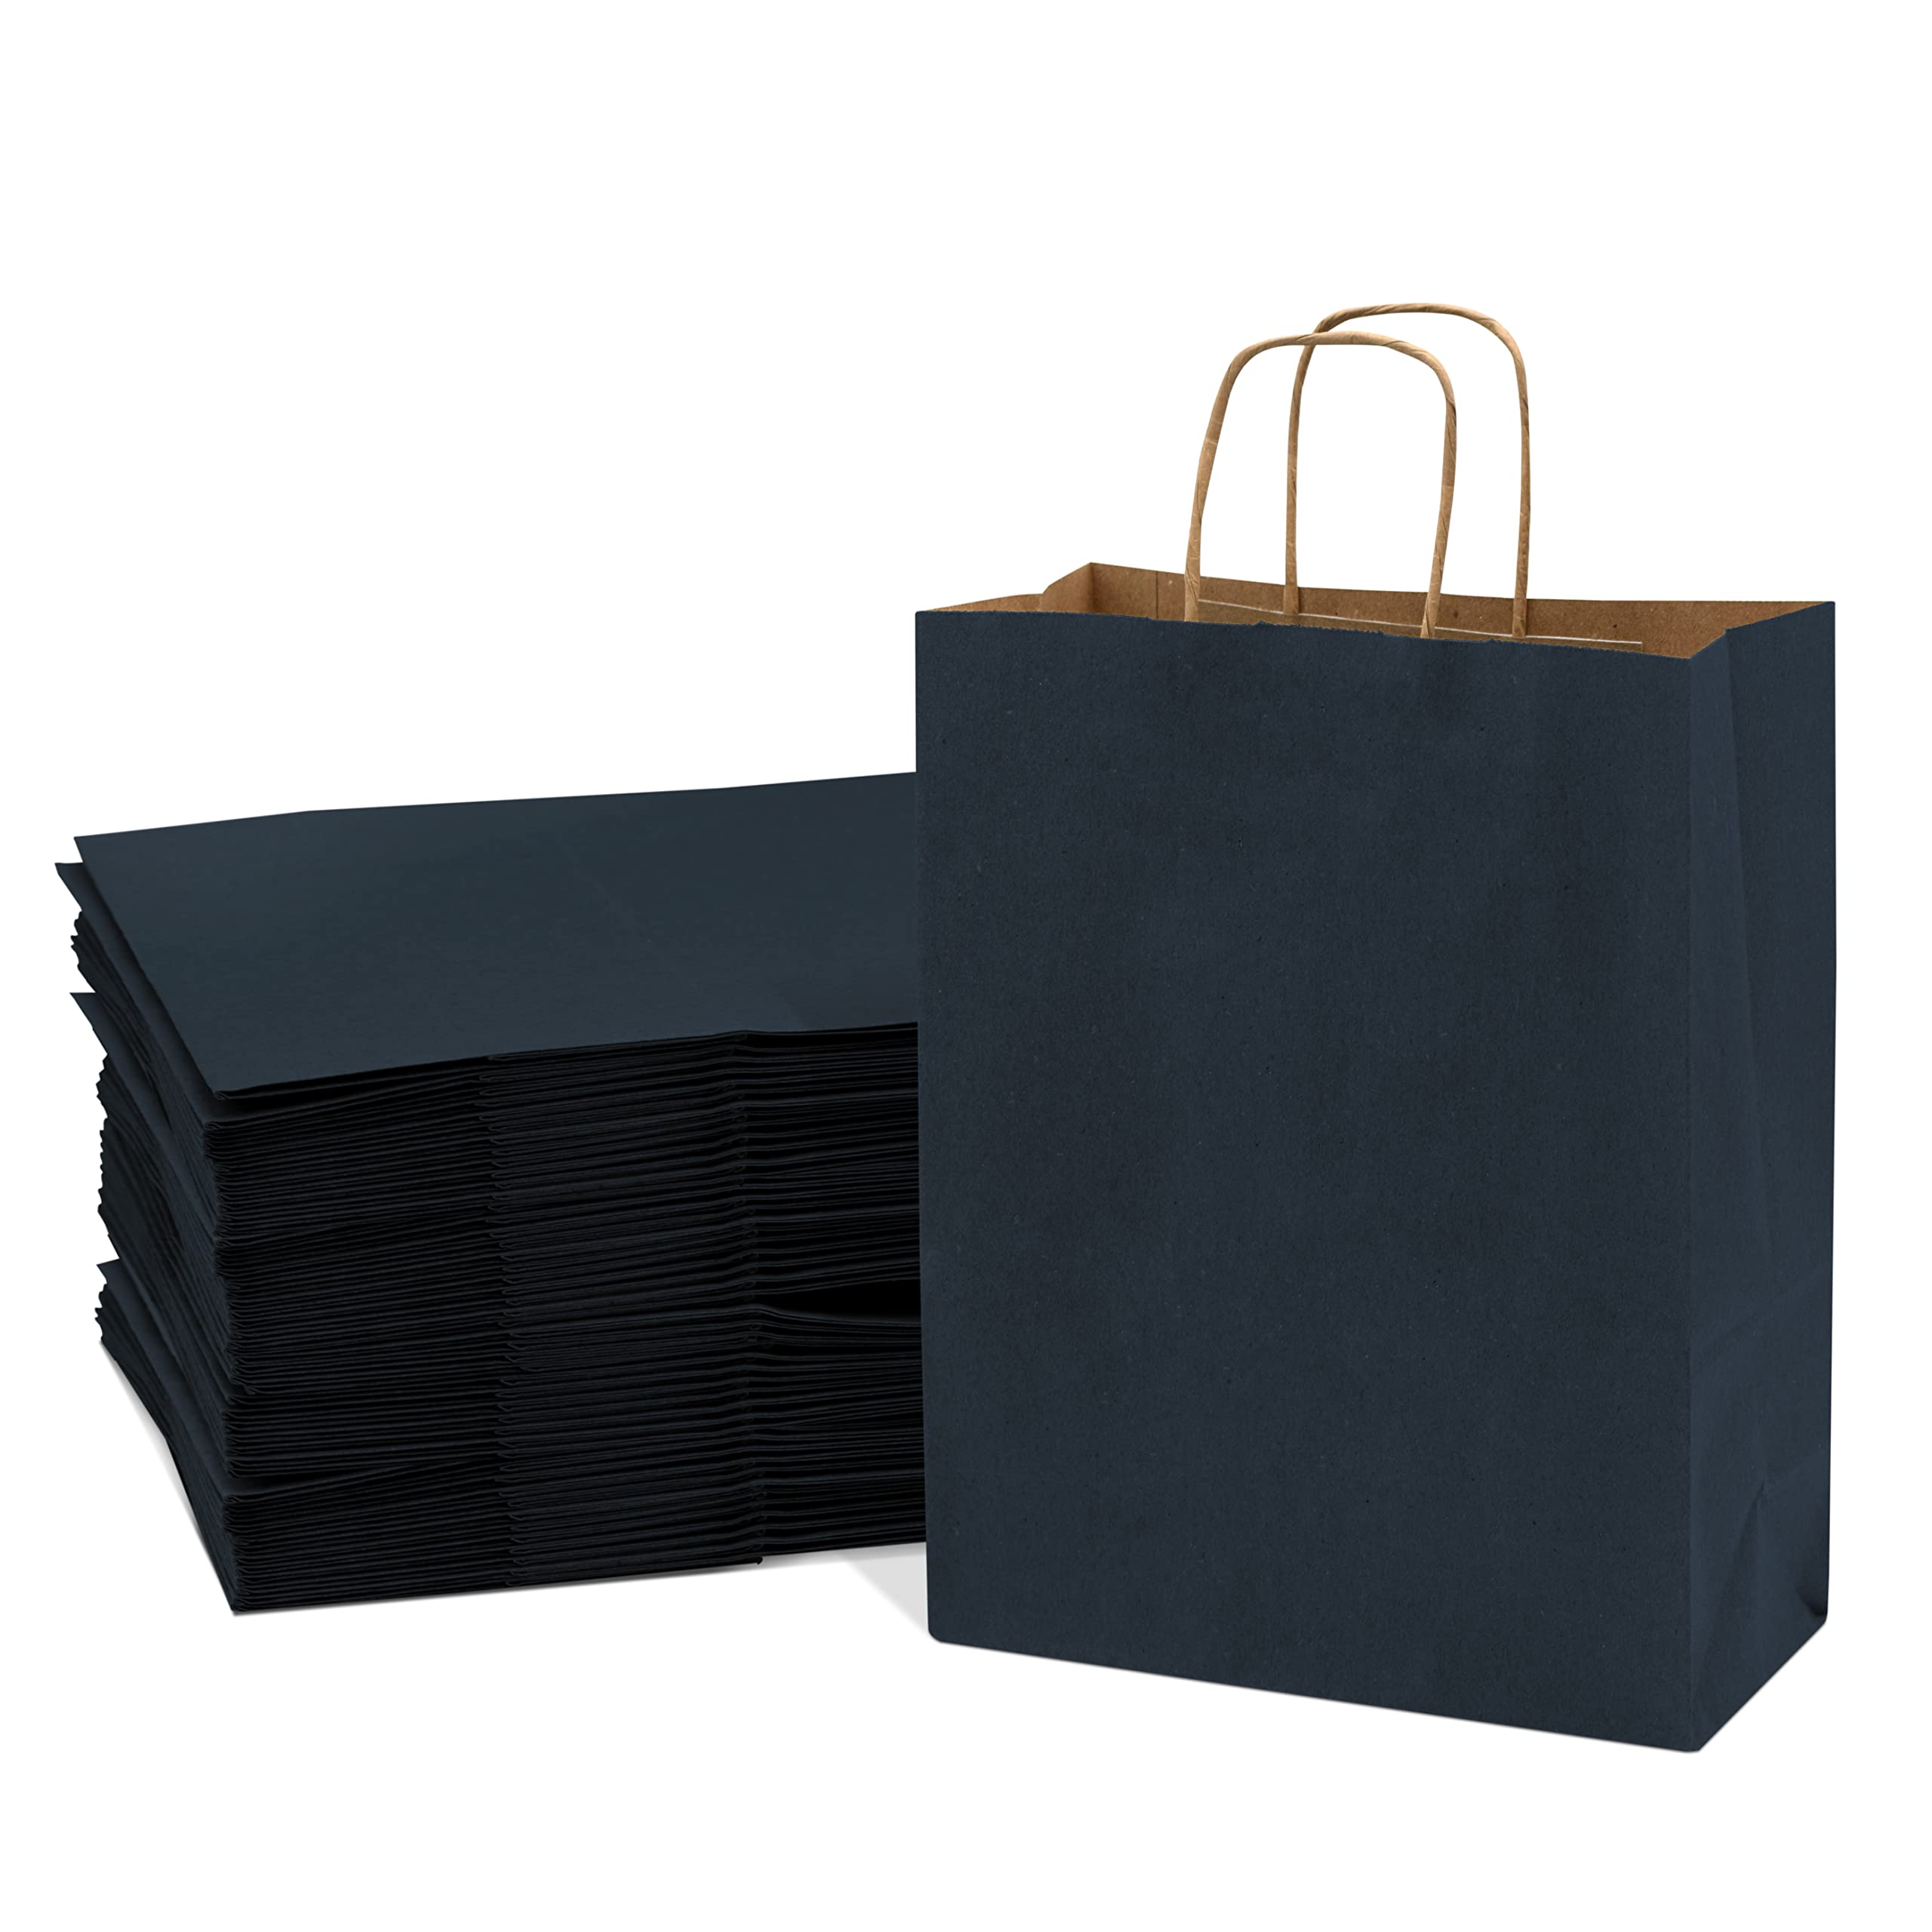 Blue Gift Bags - 10x5x13 100 Pack Navy Blue Gift Bags, Medium Size Kraft Paper Shopping Bags with Handles for Small Business, Retail, Boutique Merchandise, Goodie & Favor Bags, Boys Gift Wrap, Bulk  - Like New